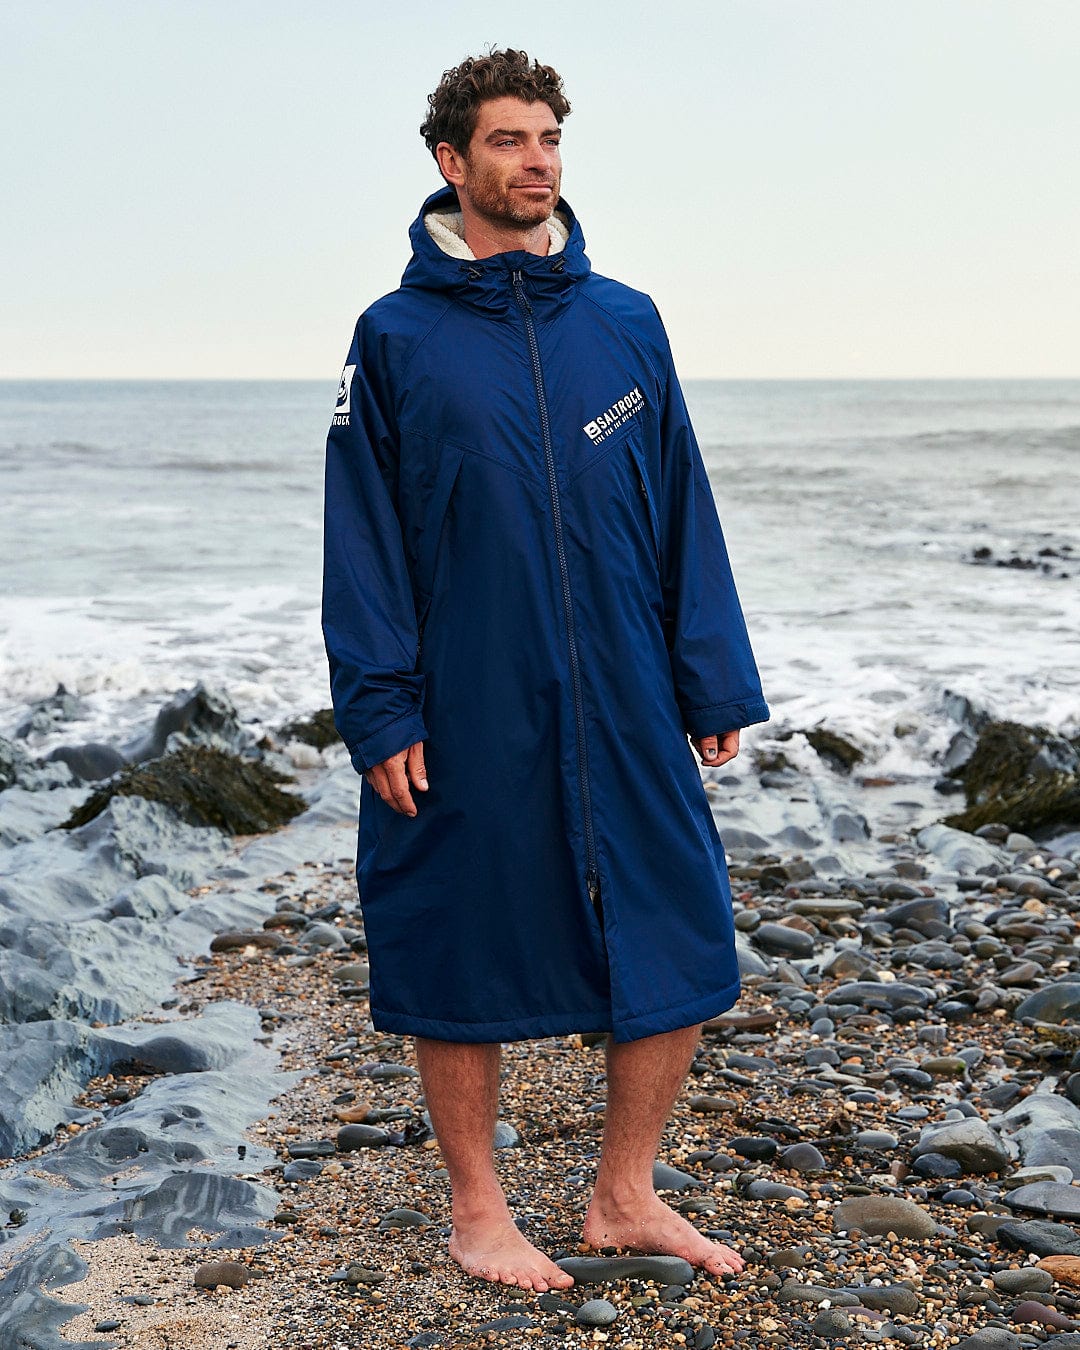 Man standing on a rocky beach wearing a Saltrock Recycled Four Seasons Changing Robe in Blue, with the ocean in the background.